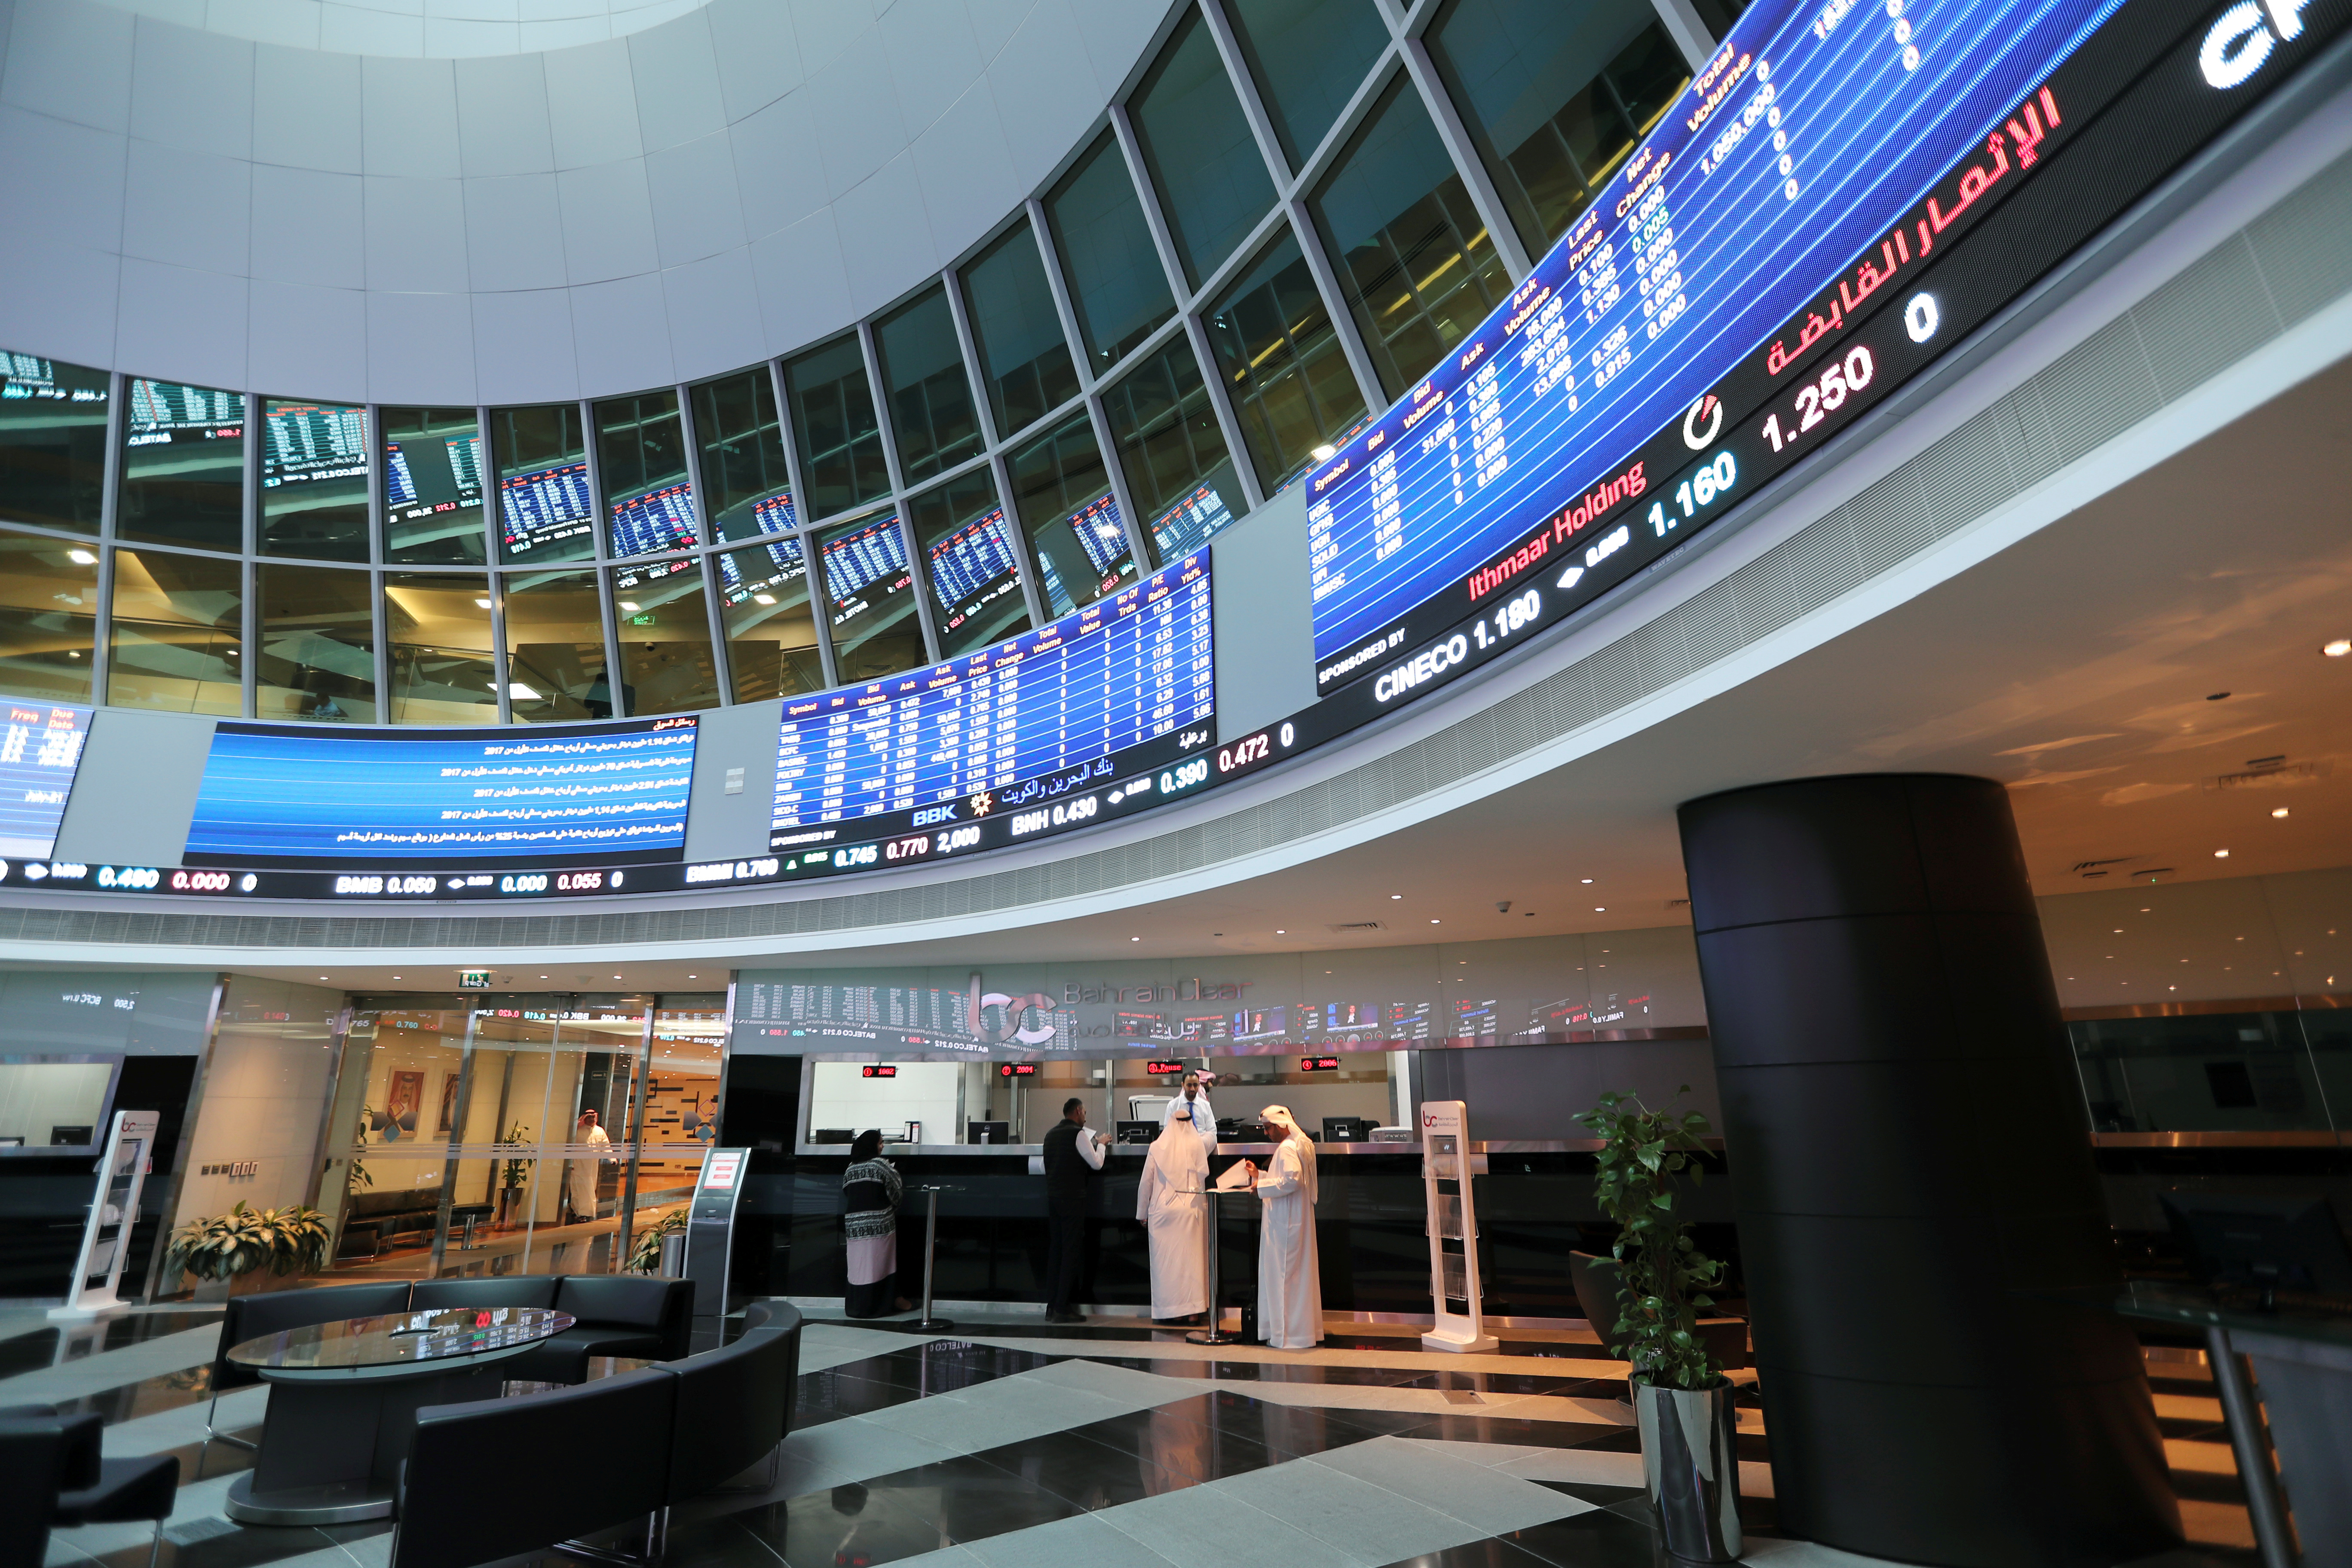 Traders talk with the officials at Bahrain Bourse in Manama